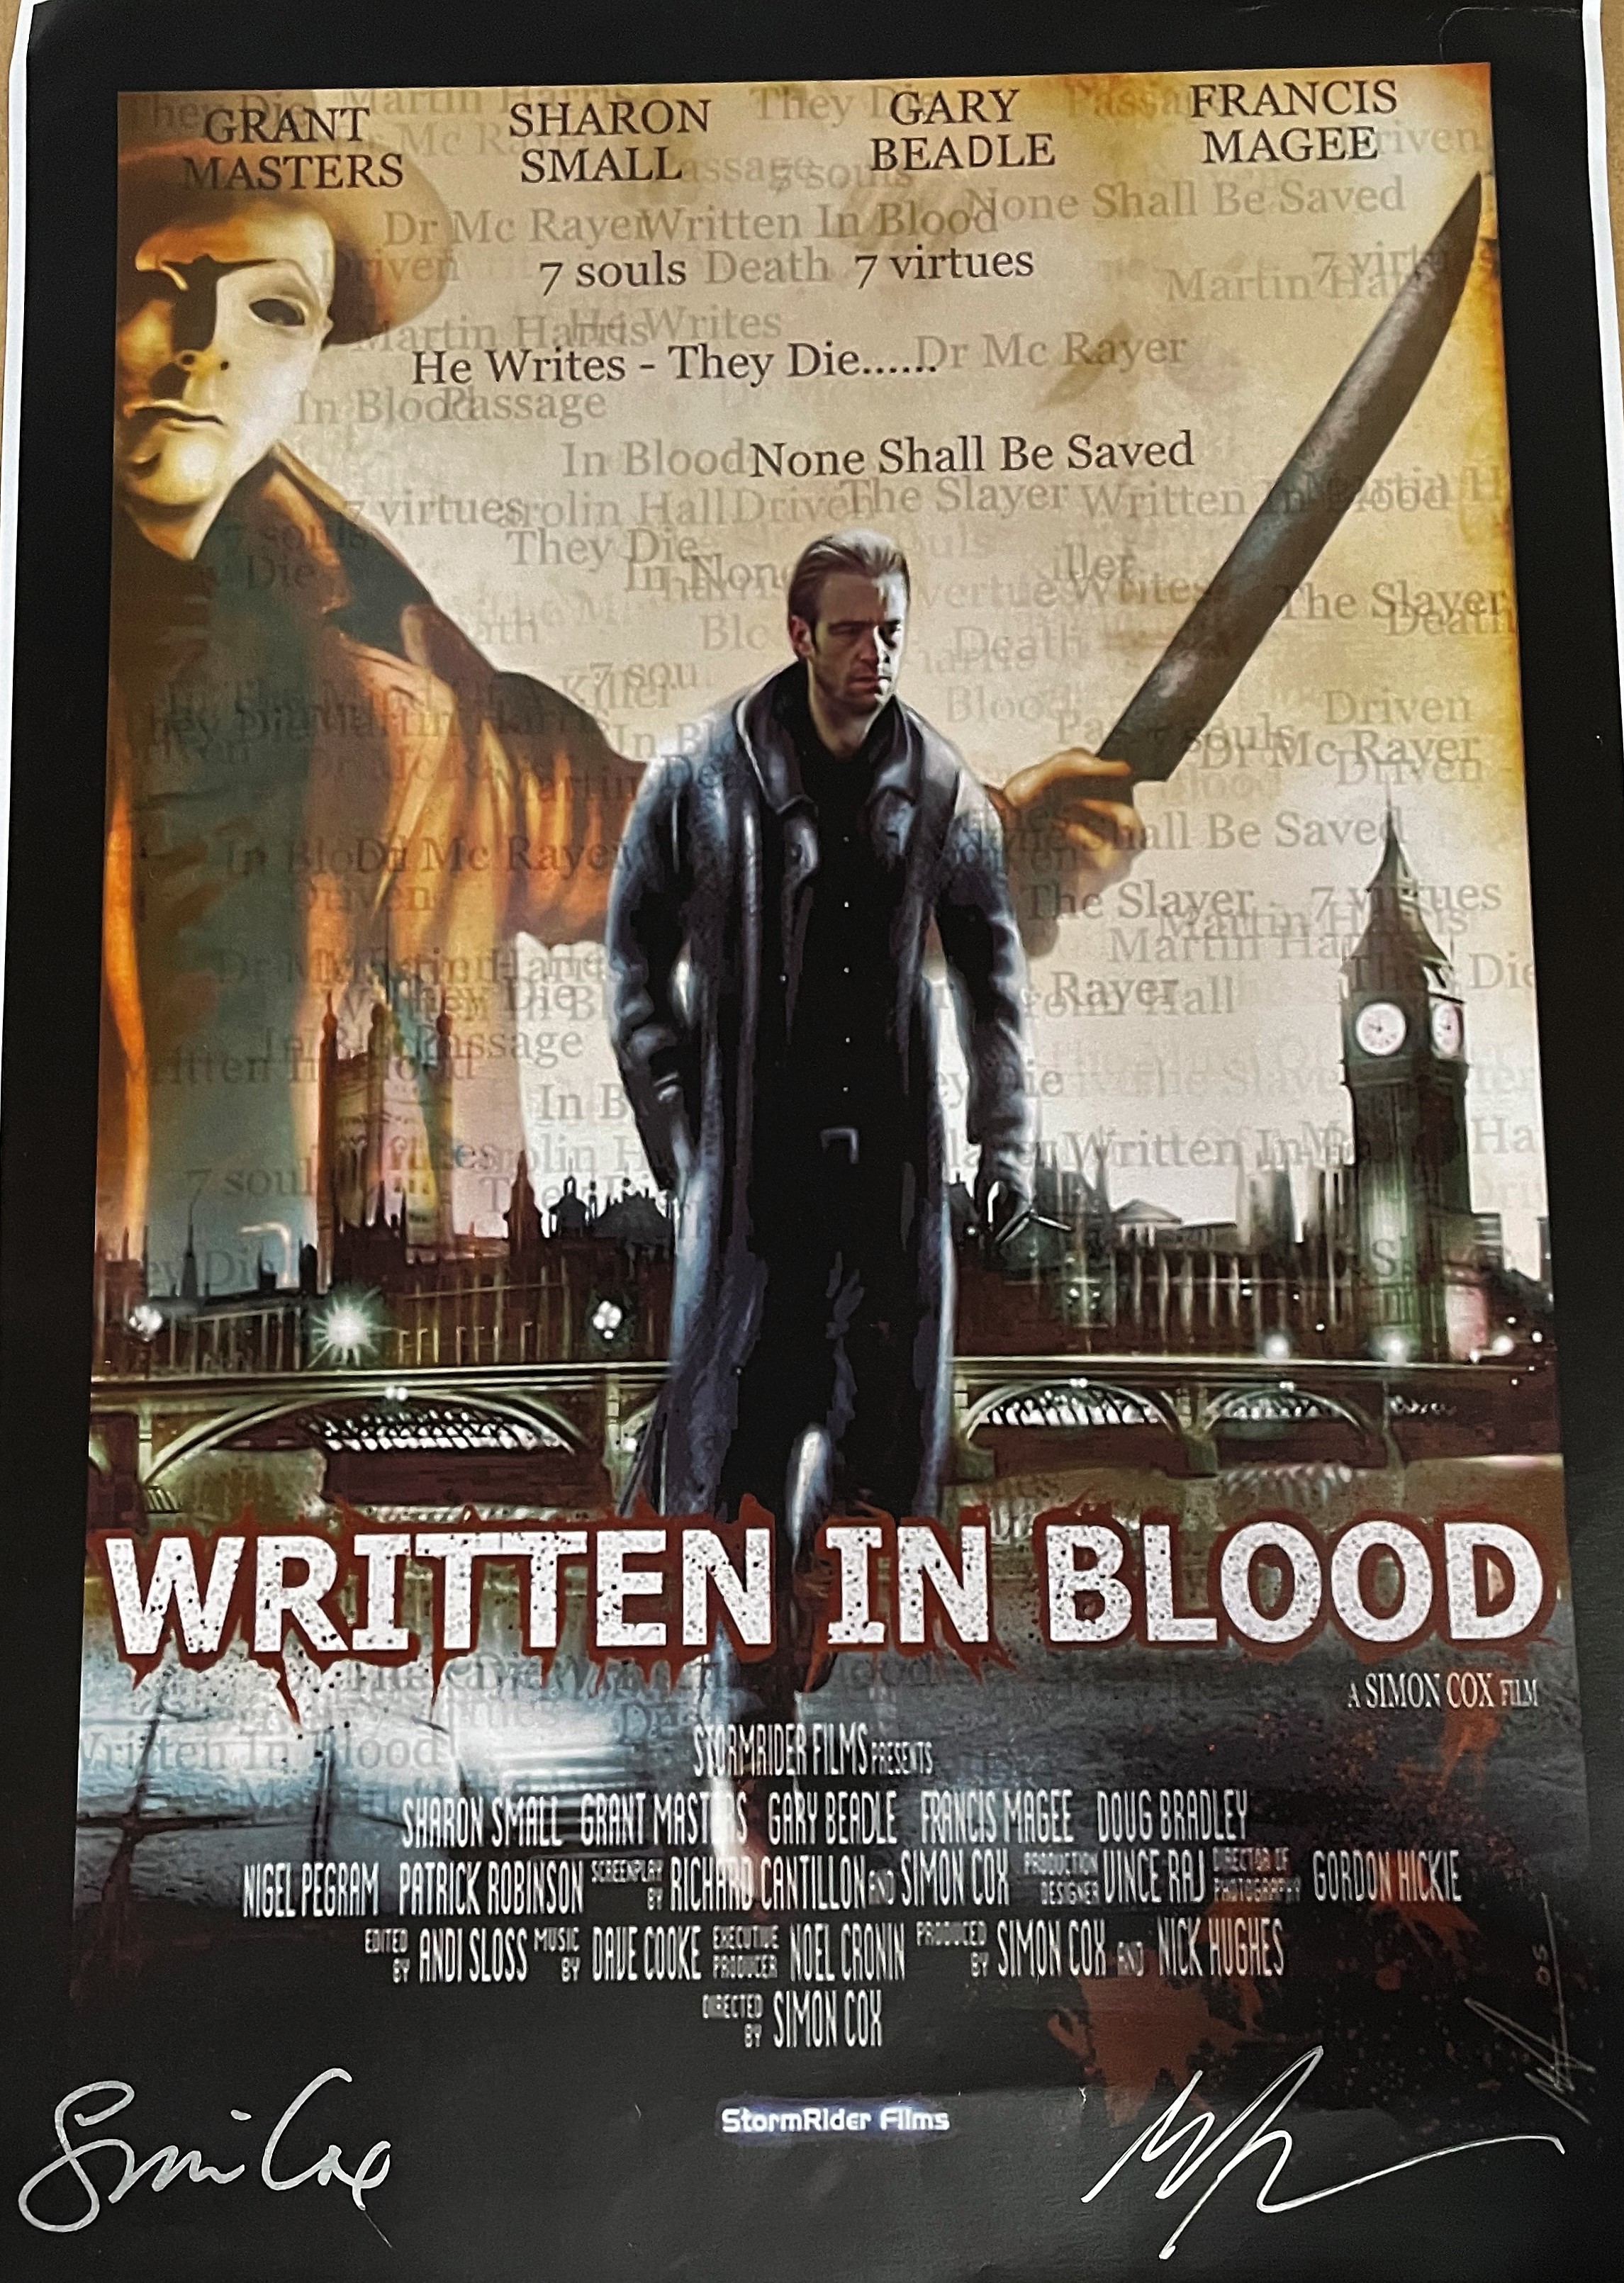 Written In Blood Film Poster Signed by Producer Simon Cox and Matthew Allsopp. Measuring 11. 5x16. 5